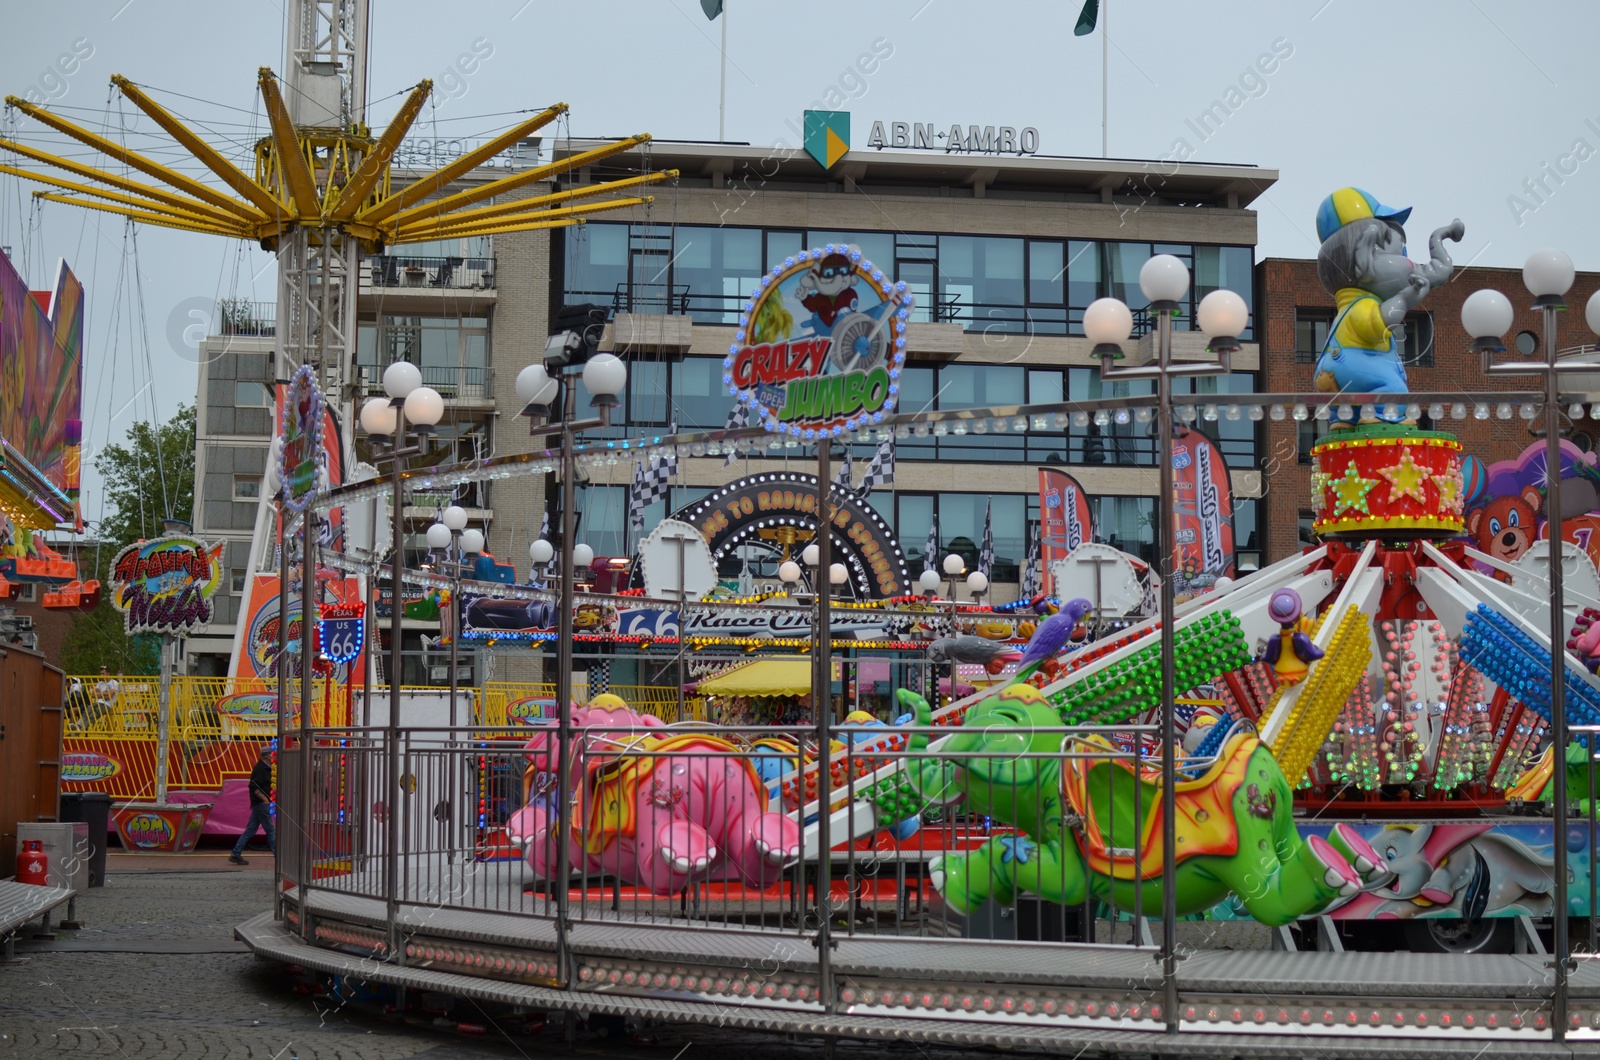 Photo of GRONINGEN, NETHERLANDS - MAY 20, 2022: Carousel attraction in outdoor amusement park